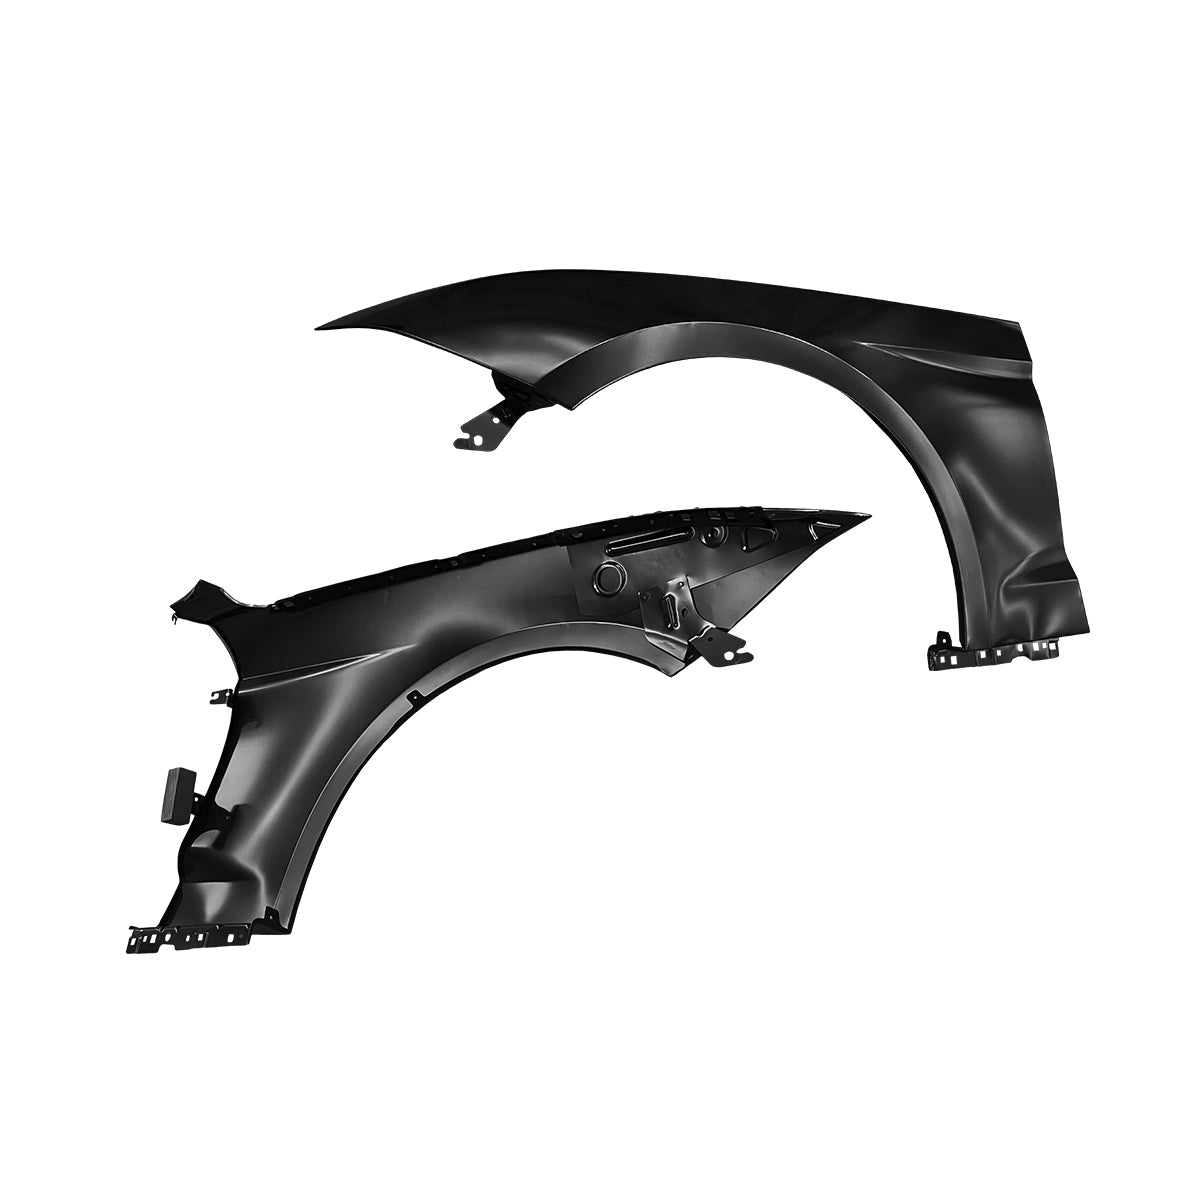 Replacement FRONT FENDER, LH, 2018-2022 Ford Mustang, JR3Z16006A, (Alum)